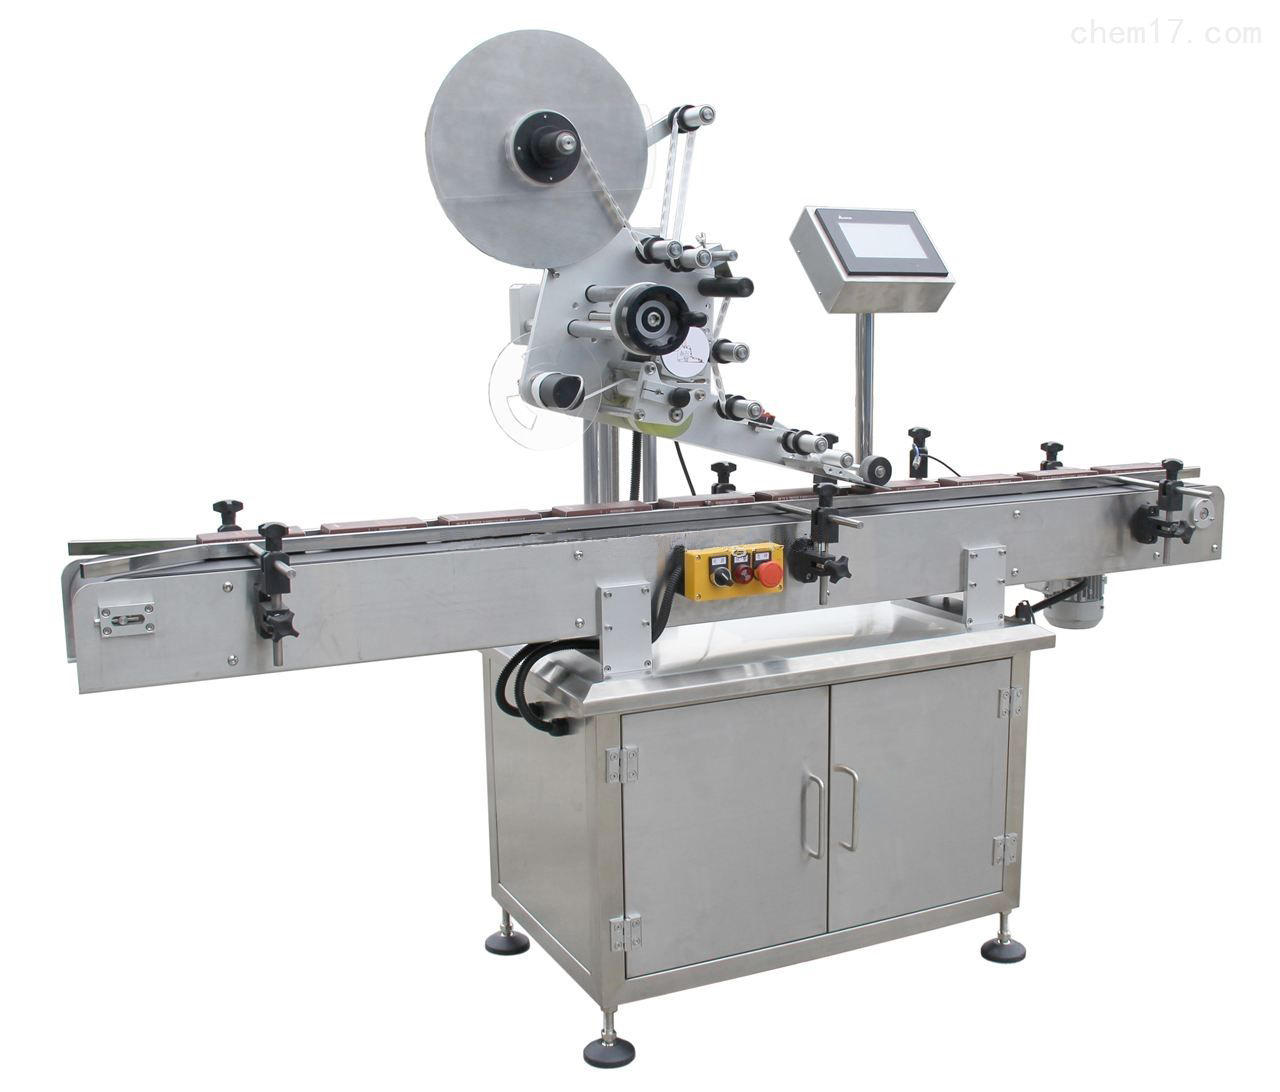 Fully automatic labeling machines show their talents in the industrial packaging market